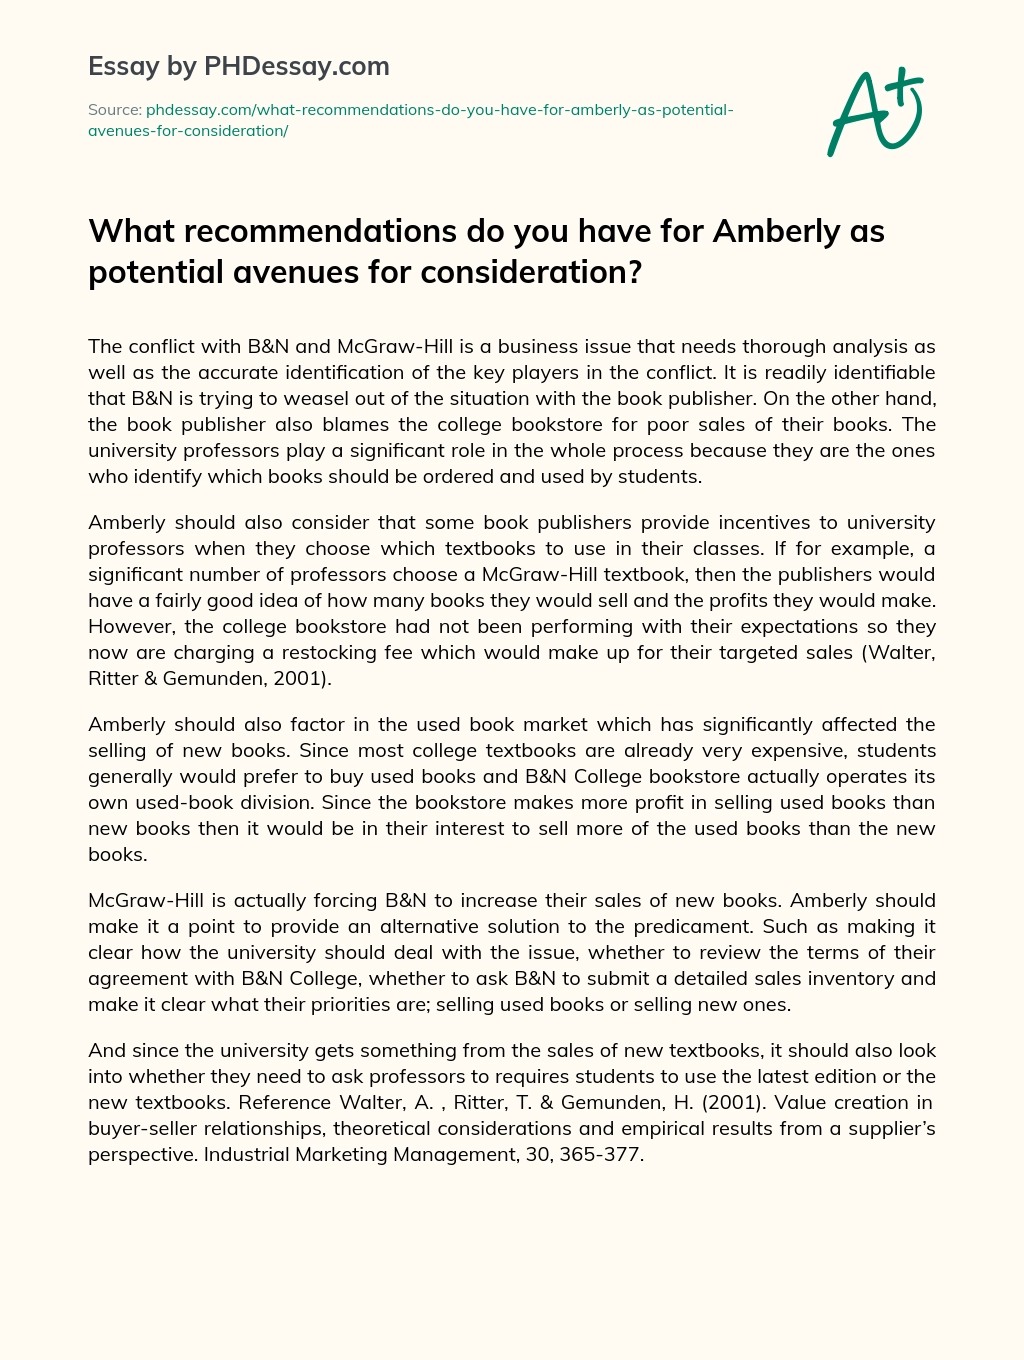 What recommendations do you have for Amberly as potential avenues for consideration? essay